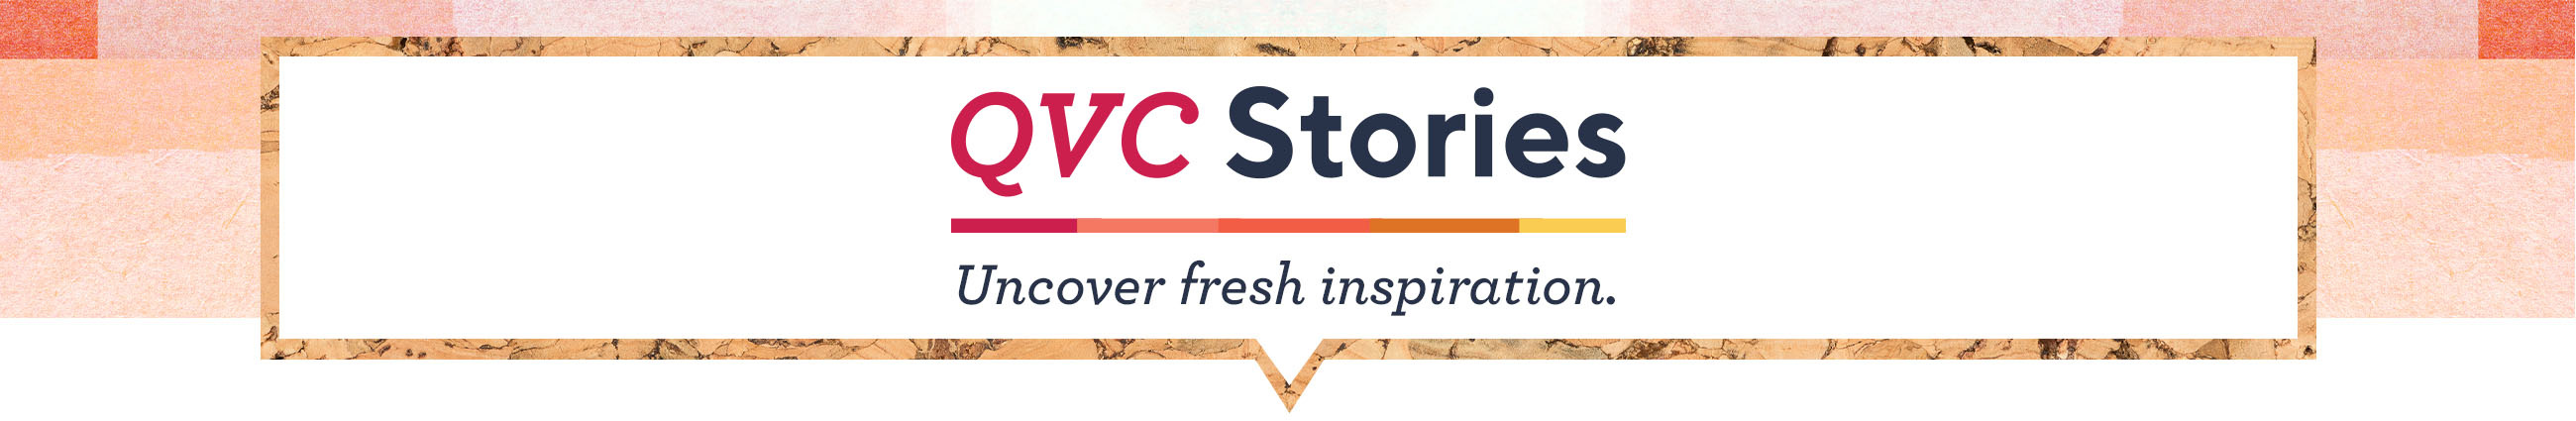 QVC Stories - Uncover fresh inspiration. 